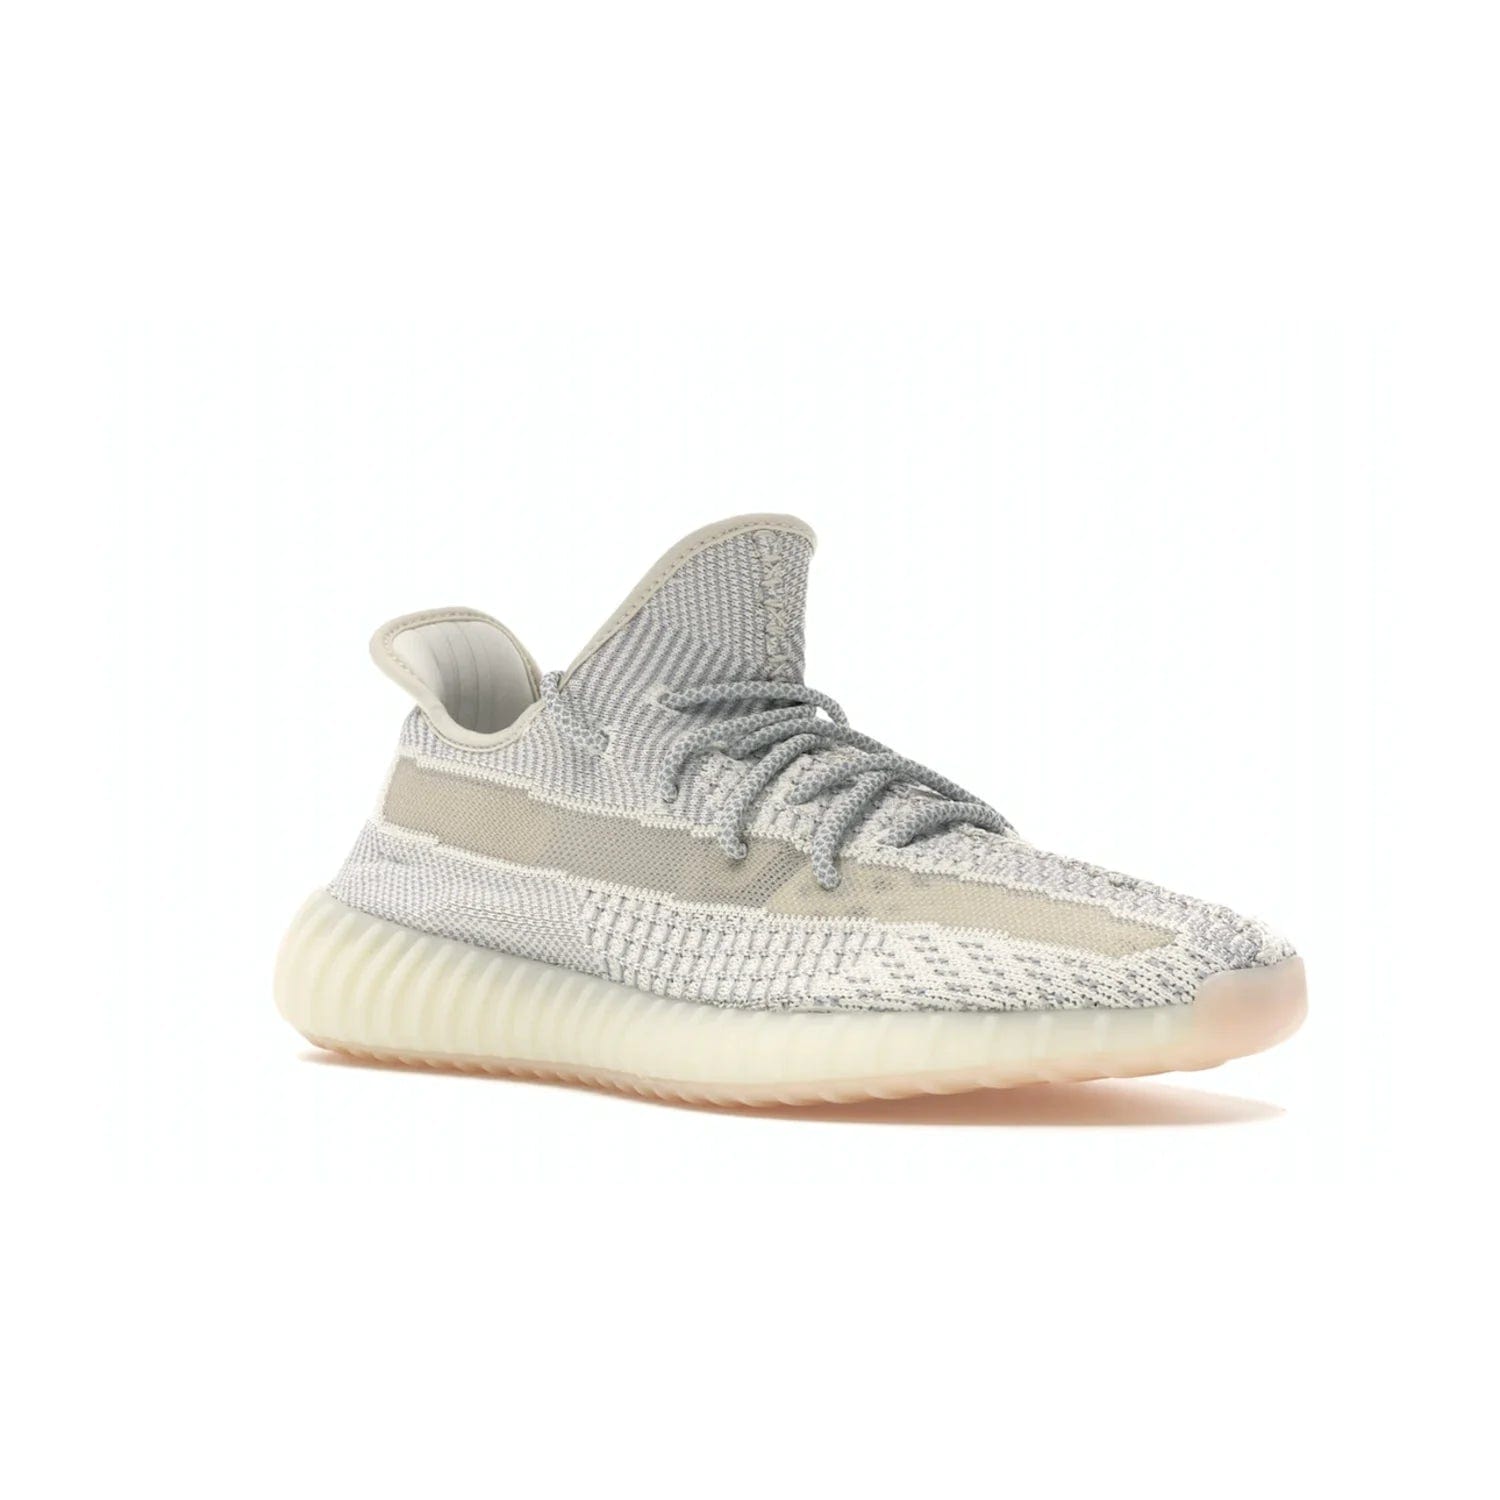 adidas Yeezy Boost 350 V2 Lundmark (Non Reflective) - Image 5 - Only at www.BallersClubKickz.com - Shop the exclusive adidas Yeezy Boost 350 V2 Lundmark with a subtle summer color, mesh upper, white-to-cream transitional midsole, light tan outsole, and pink middle stripe. Comfort and style come together in this perfect summer 350 V2. Released on July 11, 2019.